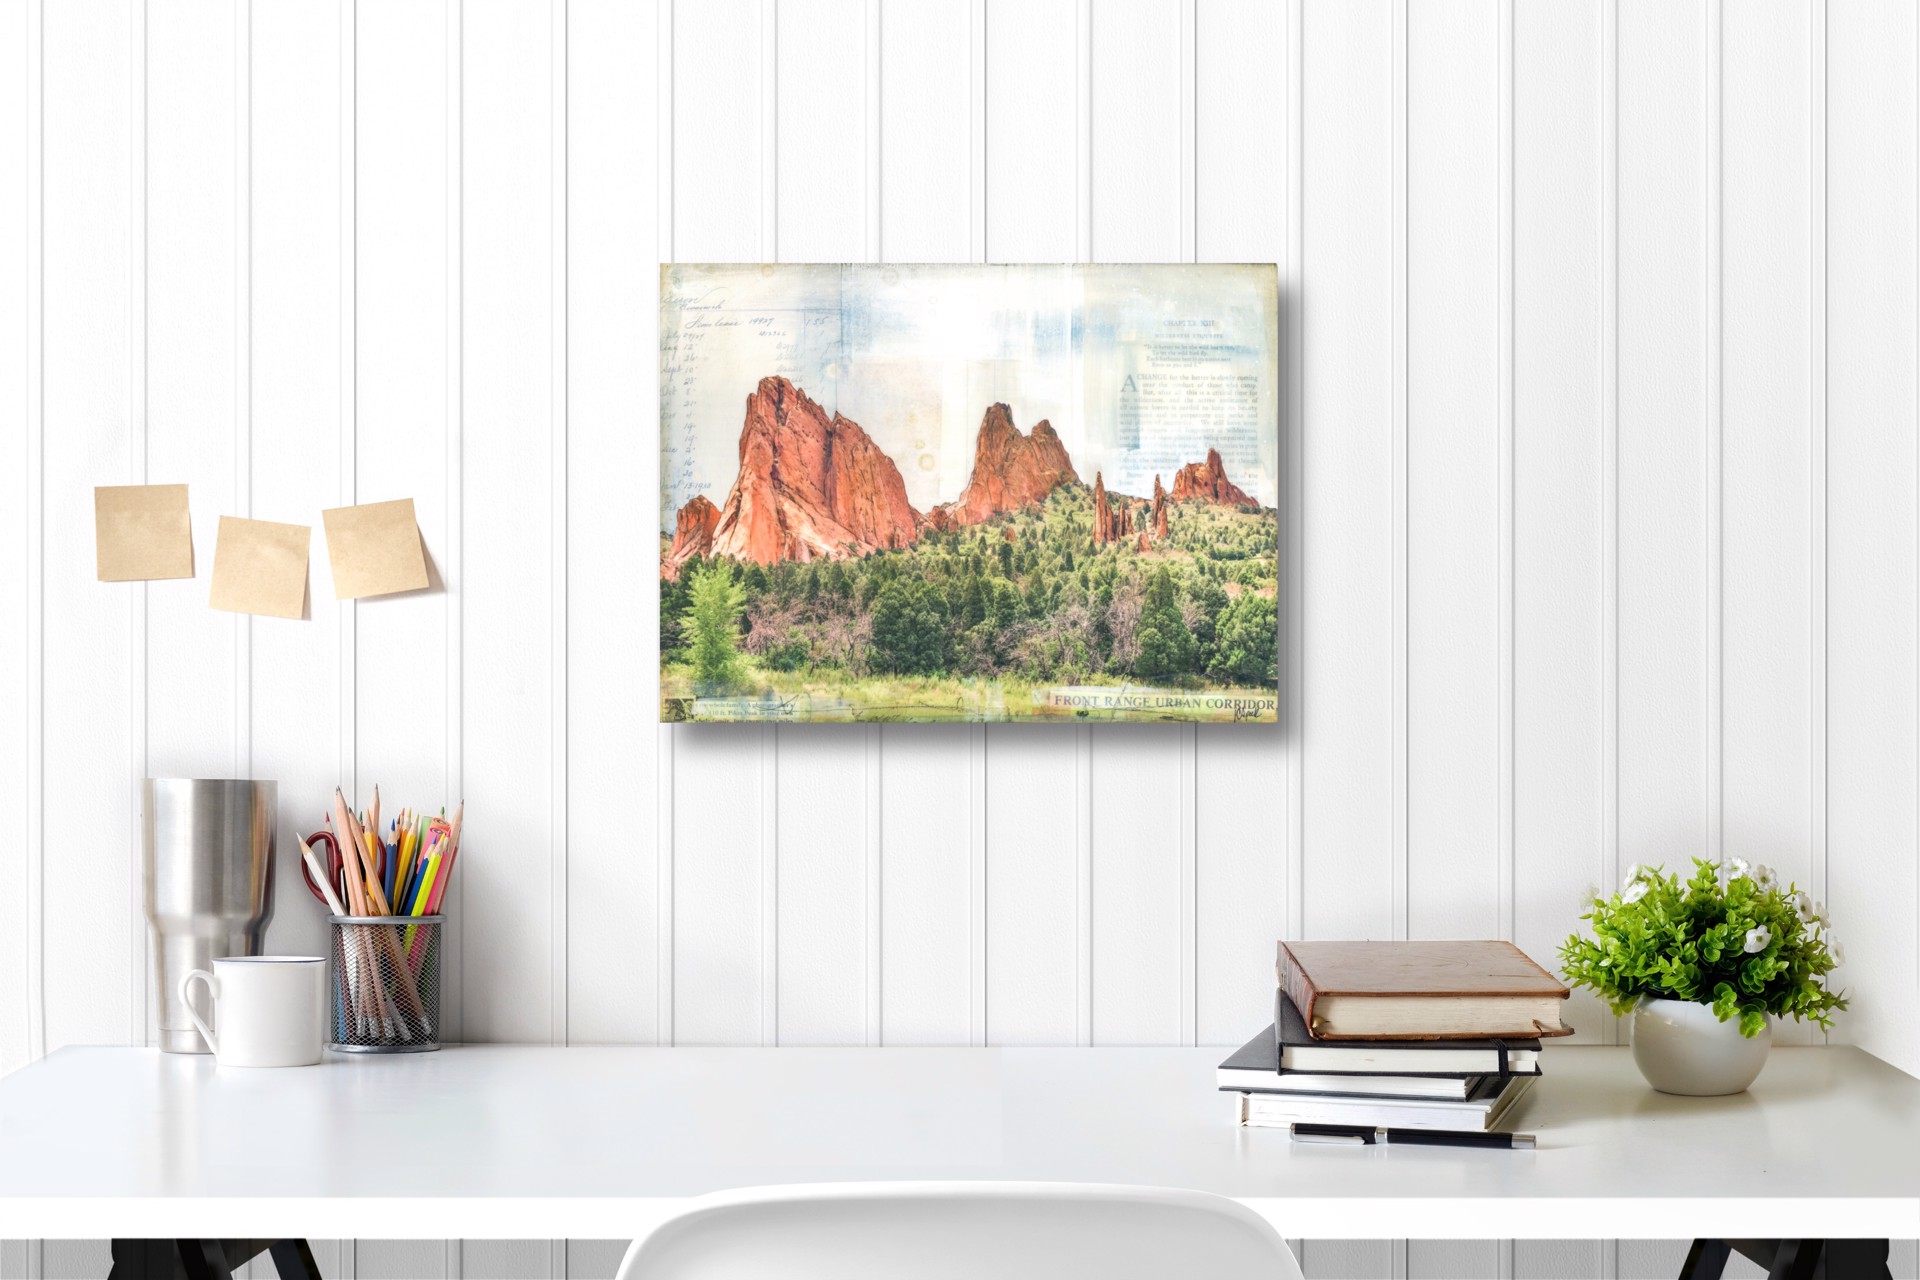 Central Garden of the Gods by JC Spock